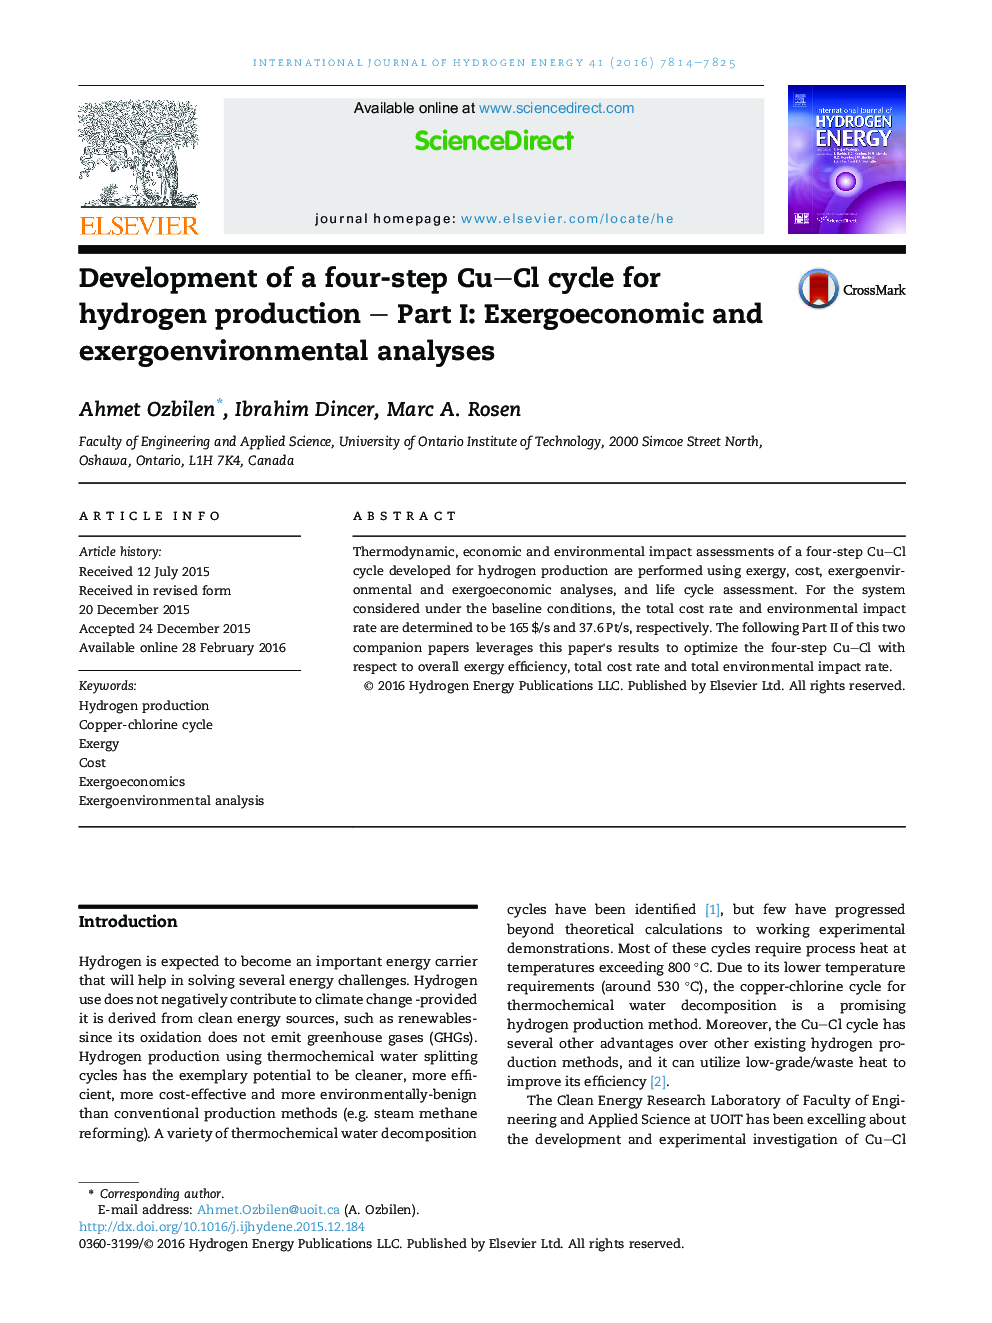 Development of a four-step Cu–Cl cycle for hydrogen production – Part I: Exergoeconomic and exergoenvironmental analyses